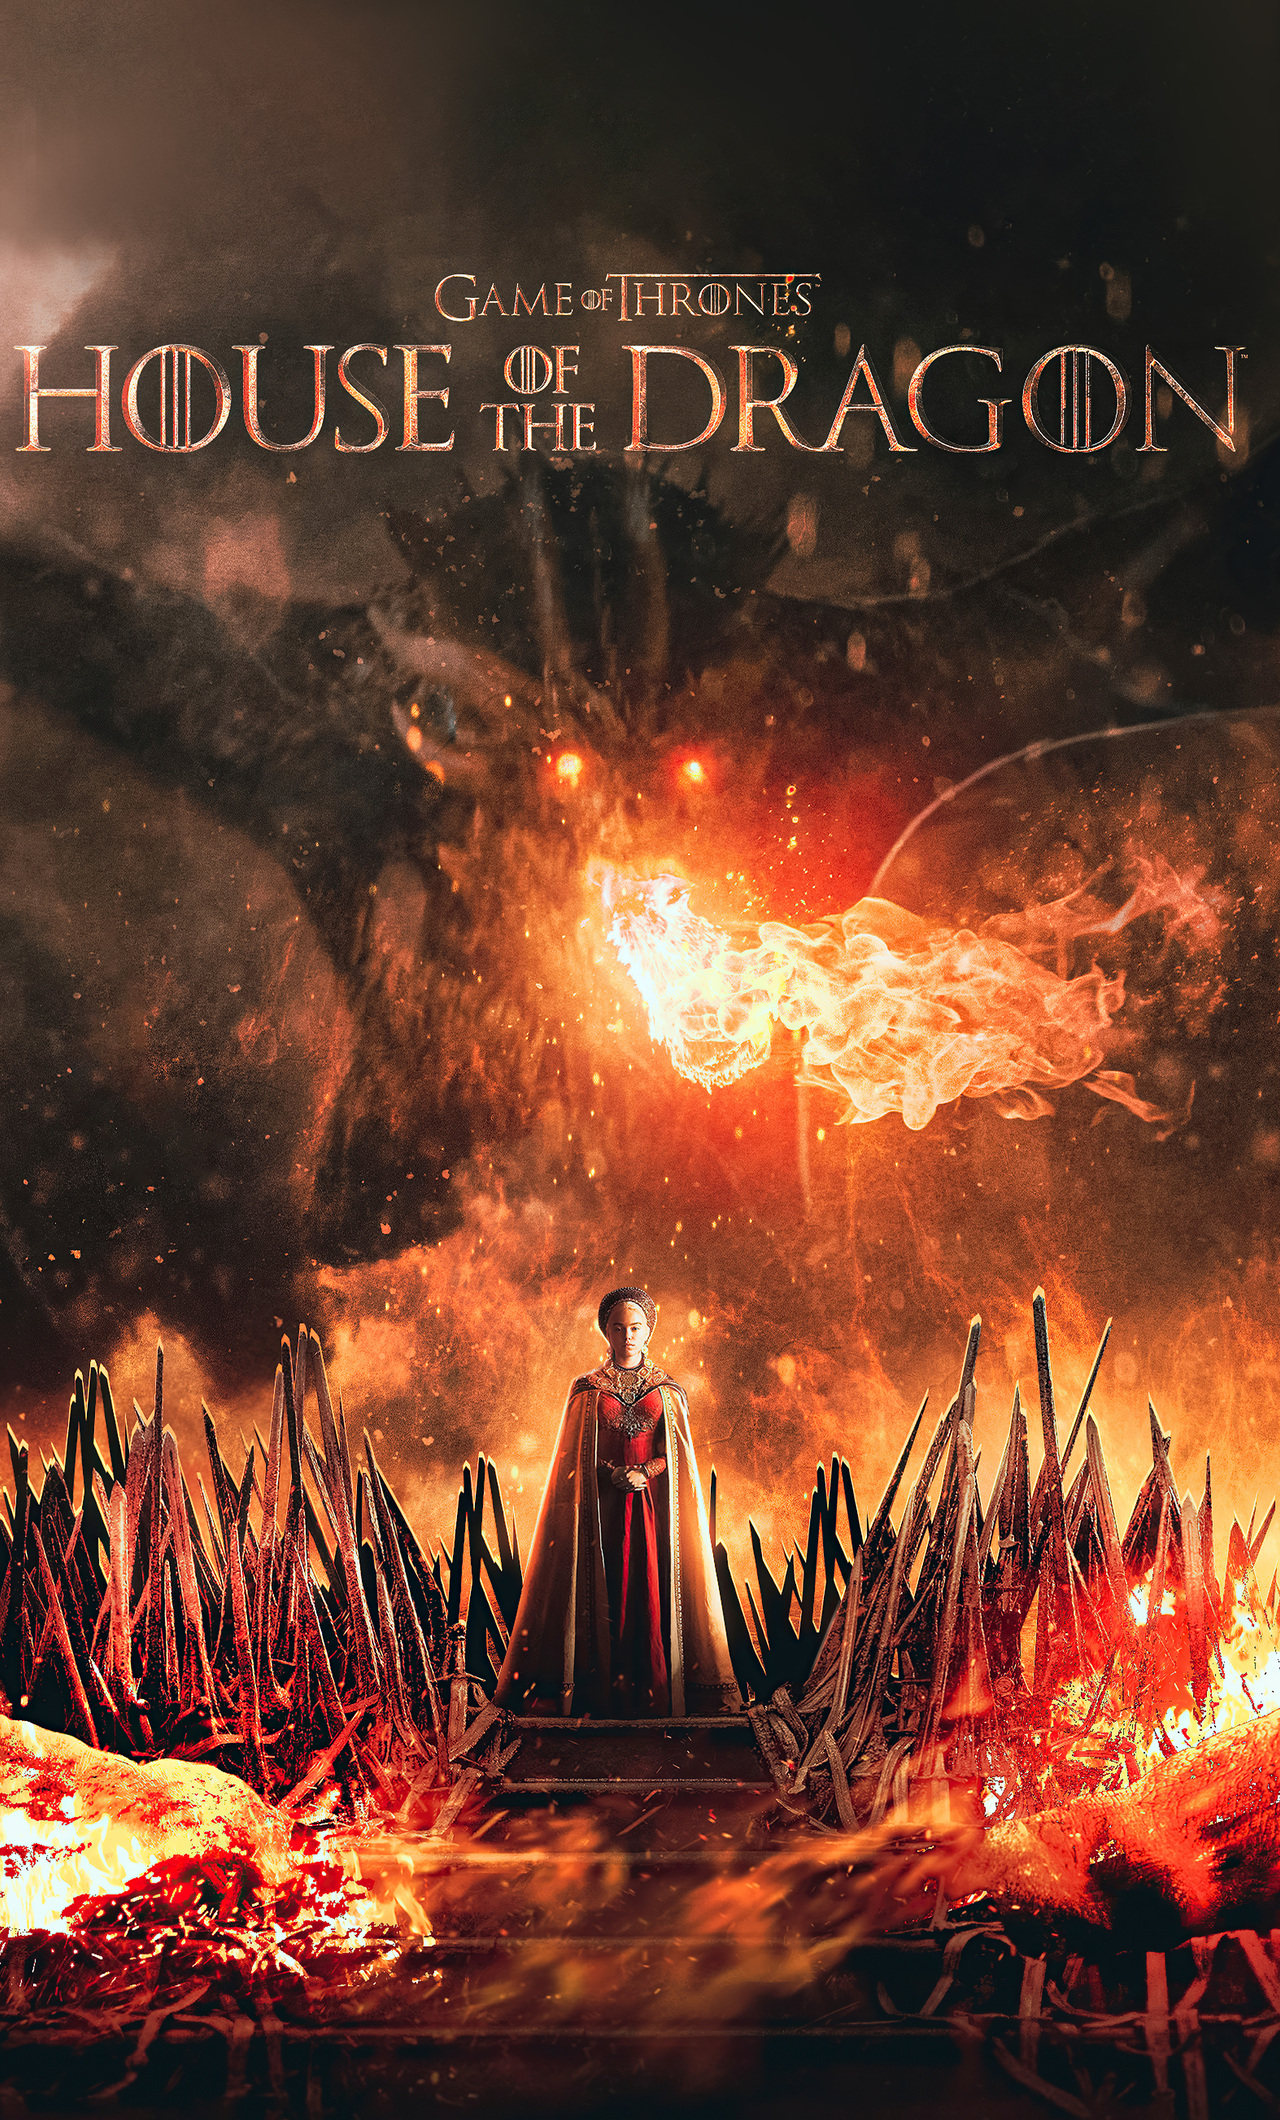 game of thrones iphone wallpaper  Google Search  Game of thrones poster  Game of thrones art Game of thrones dragons